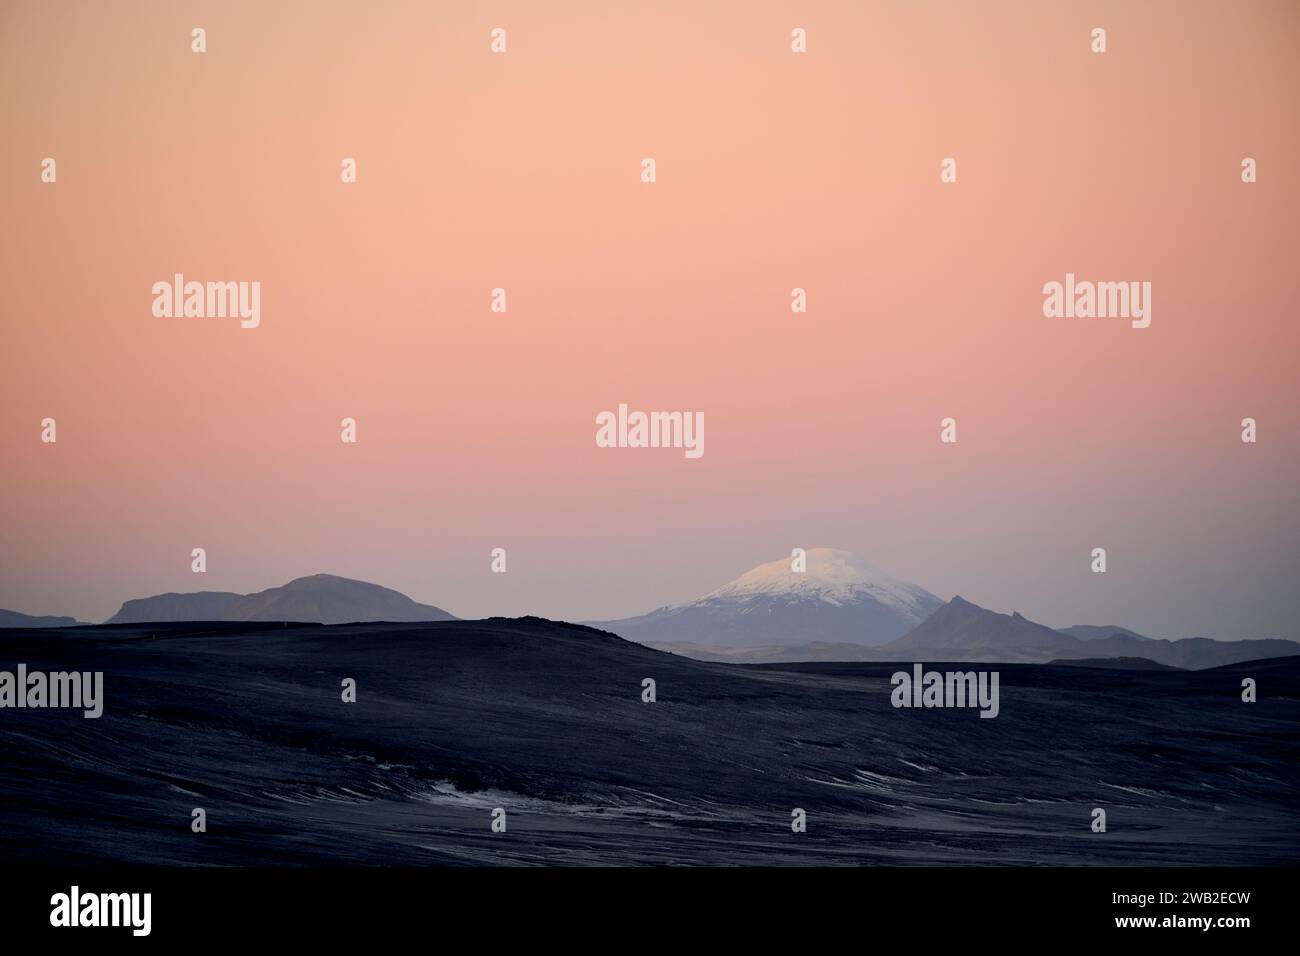 Mountains with snow against evening sky Stock Photo